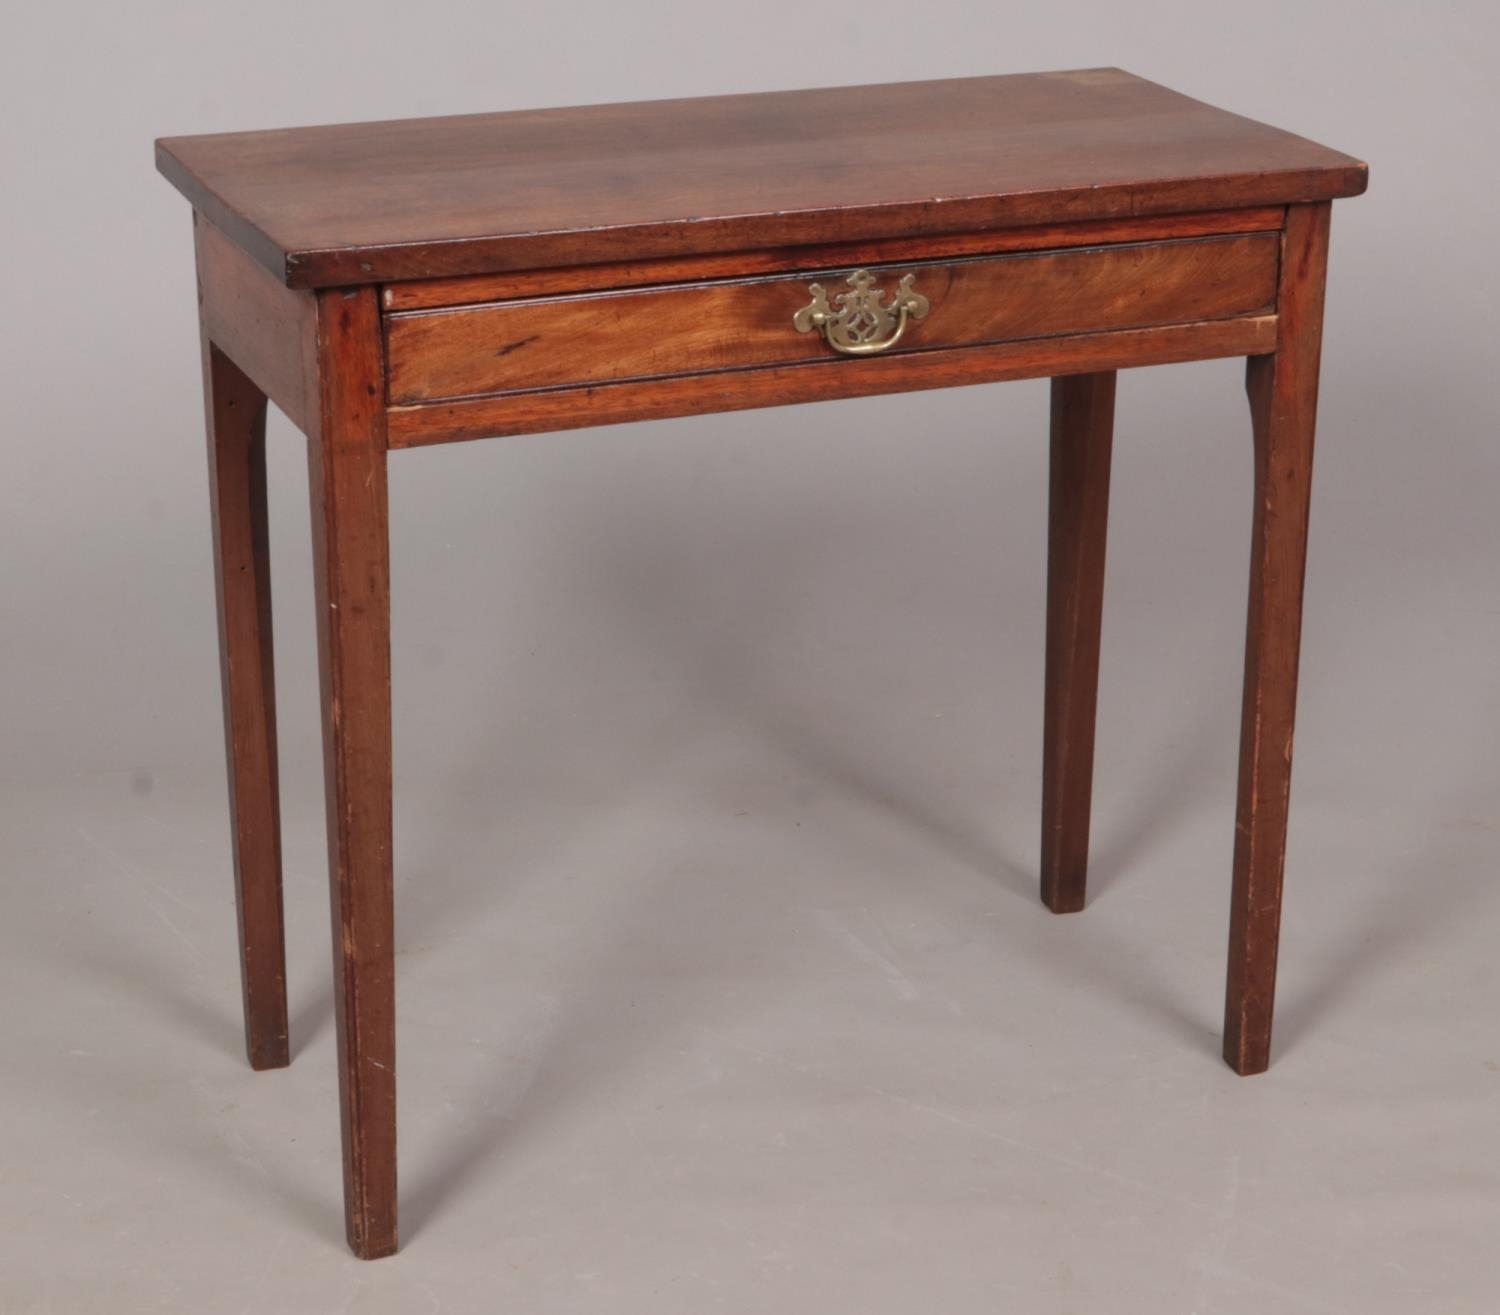 A George III mahogany side table with single drawer.